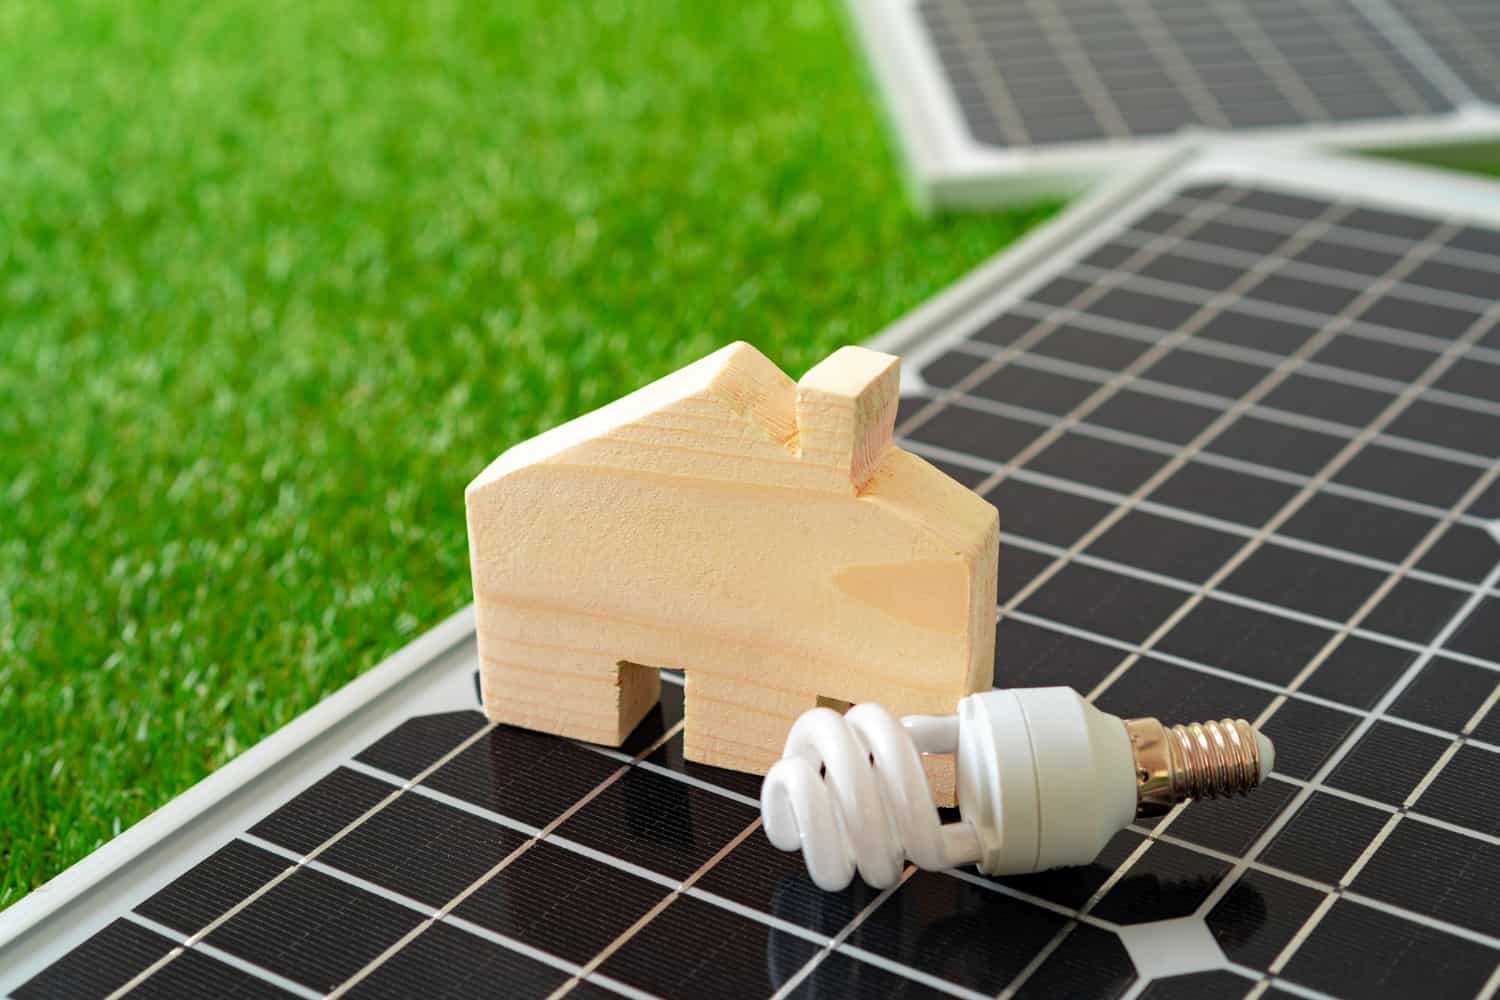 A small piece of wood in the shape of a house sits on top of a solar panel and next to an energy-efficient LED lightbulb. There is green grass in the background.